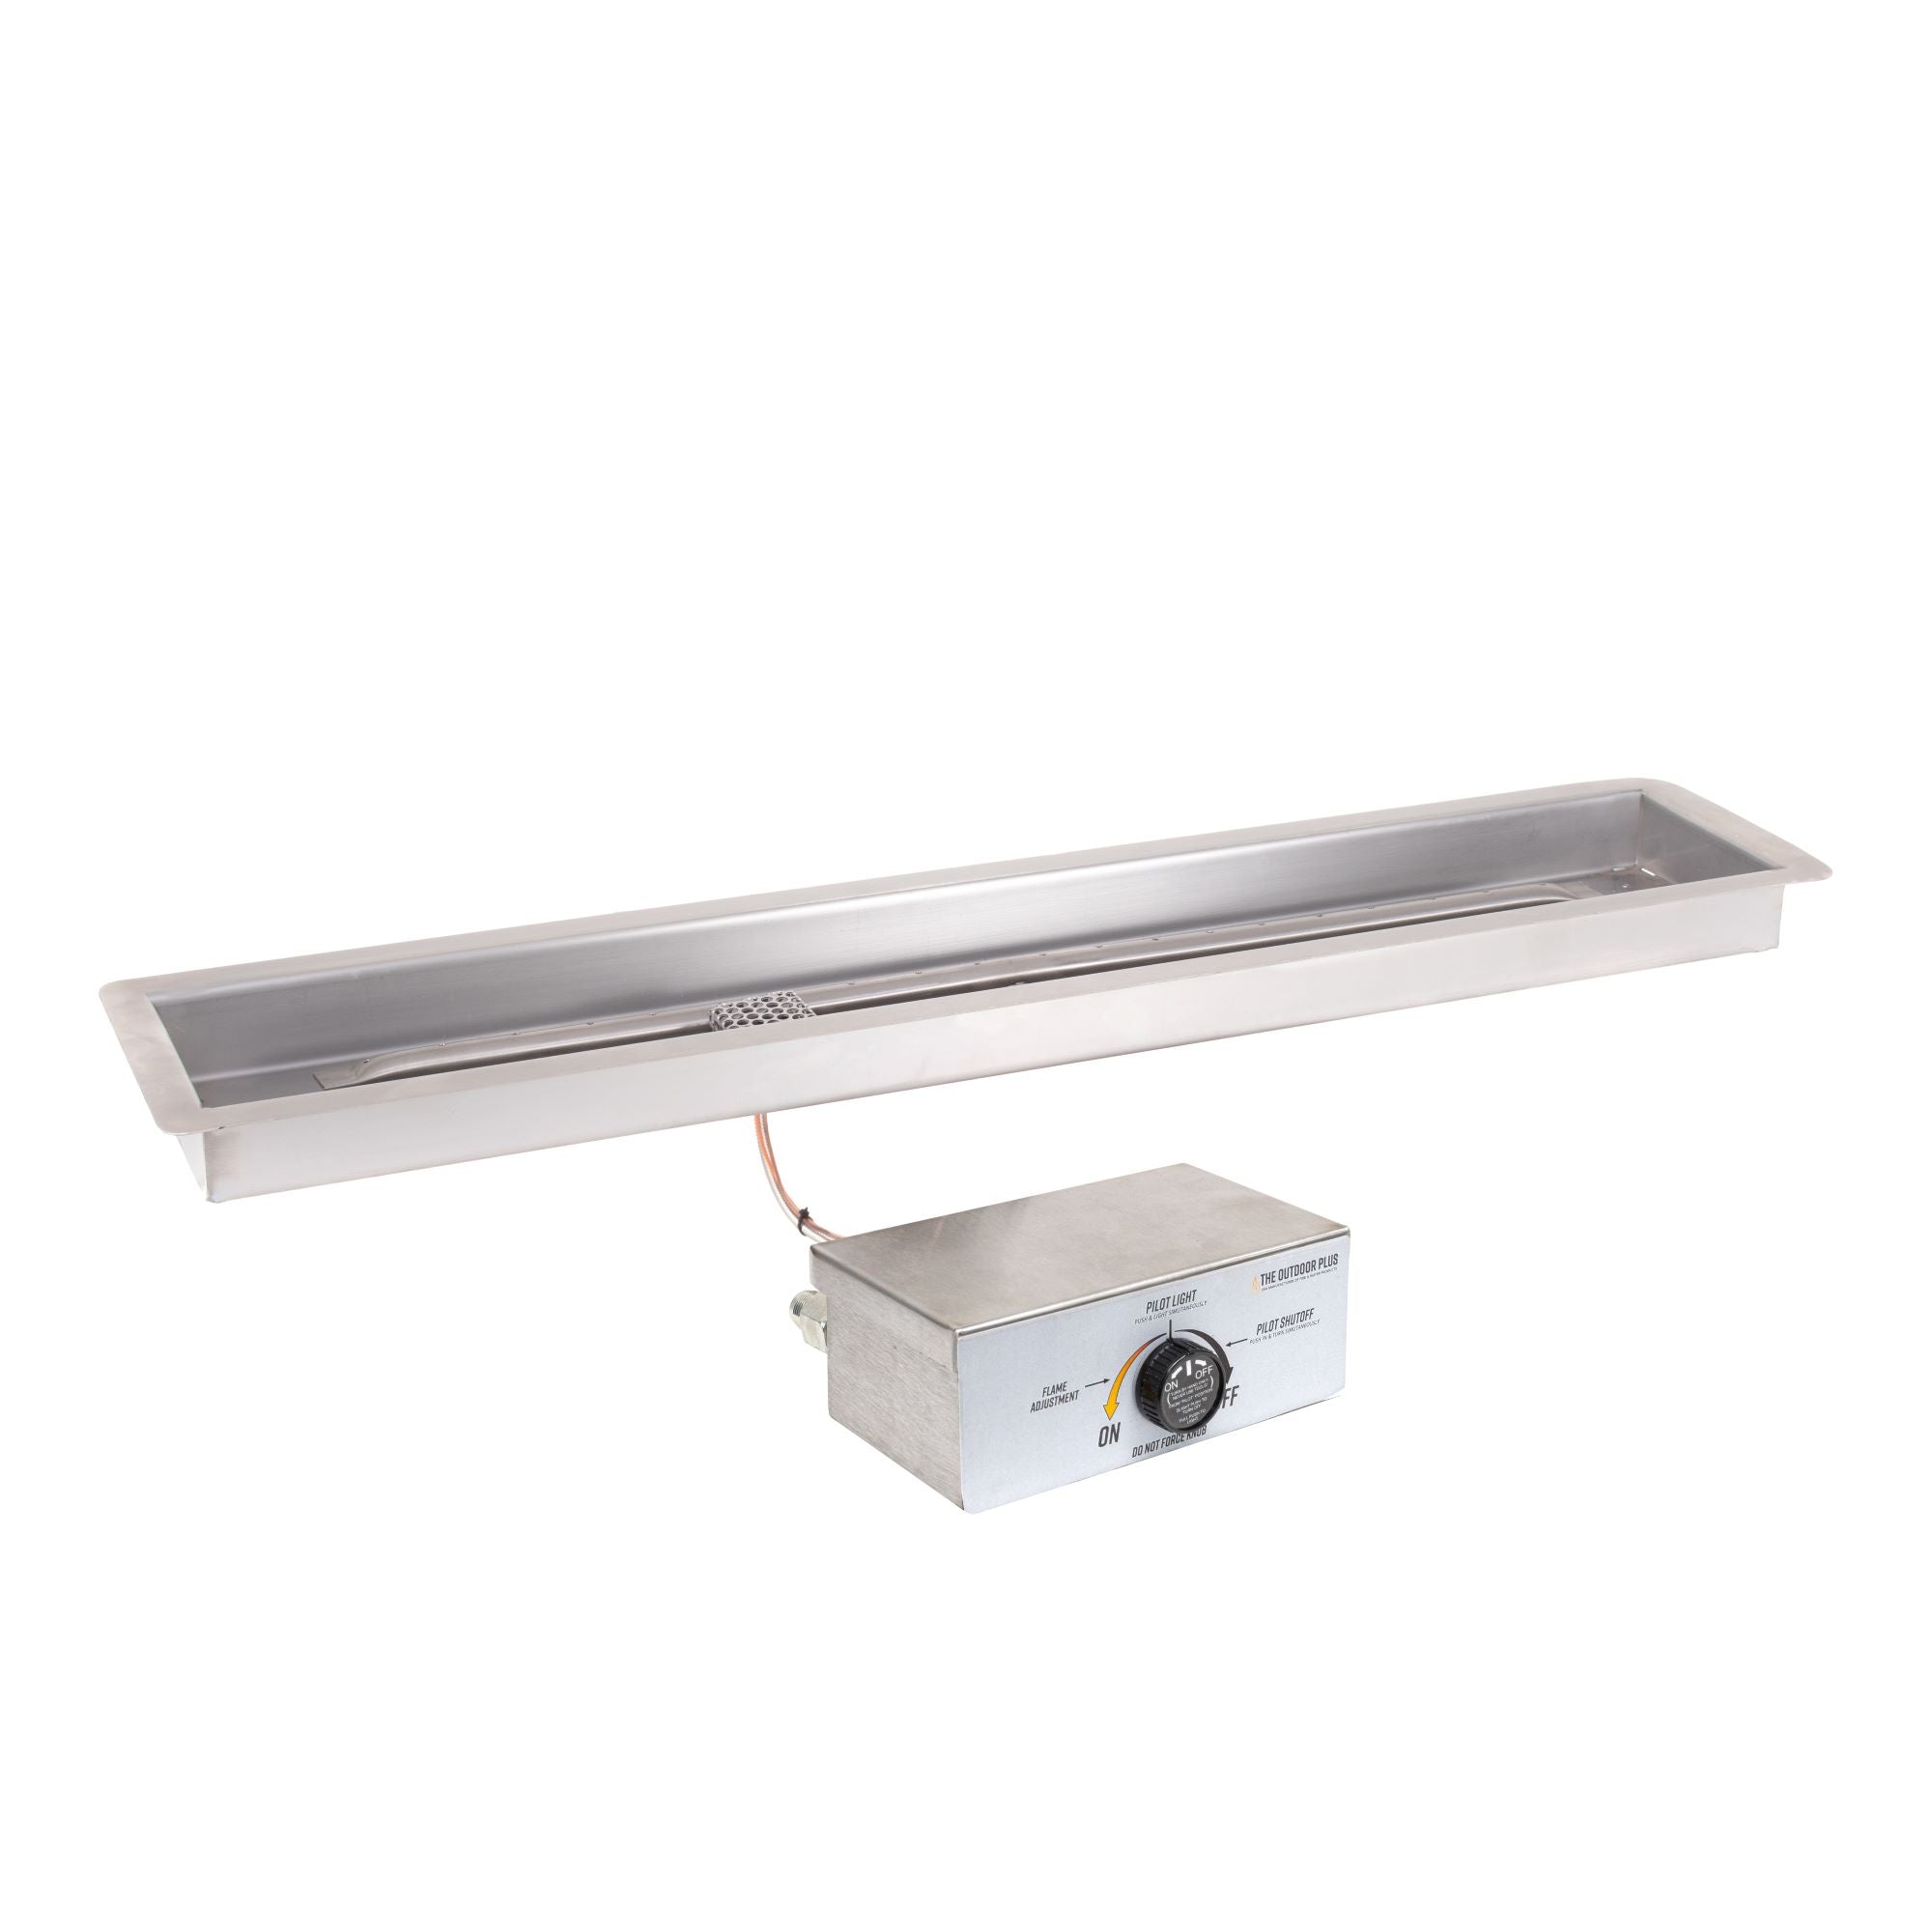 The Outdoor Plus Rectangular Drop-in Pan with Linear Stainless Steel Burner